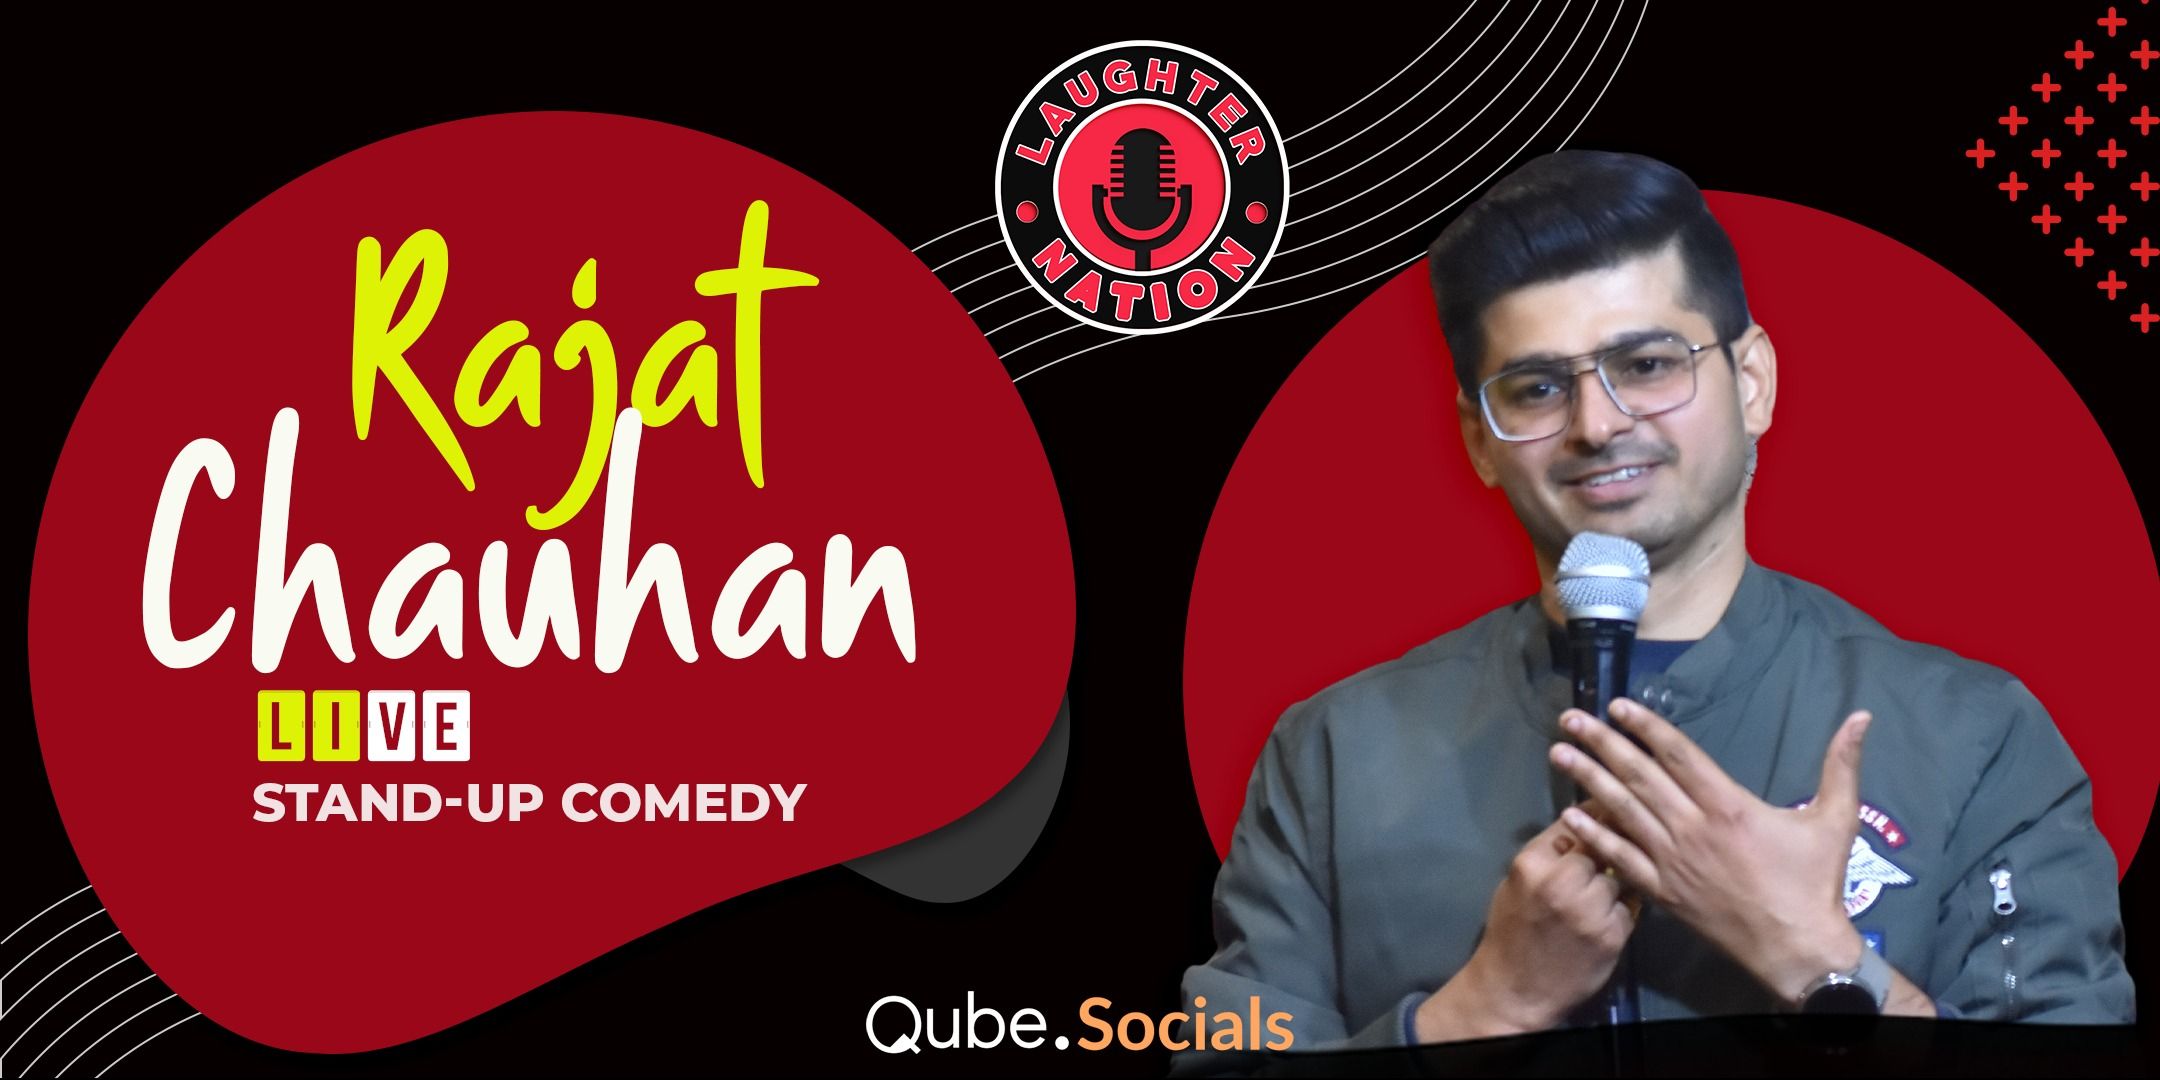 Rajat Chauhan Live – Standup Comedy Show in Delhi